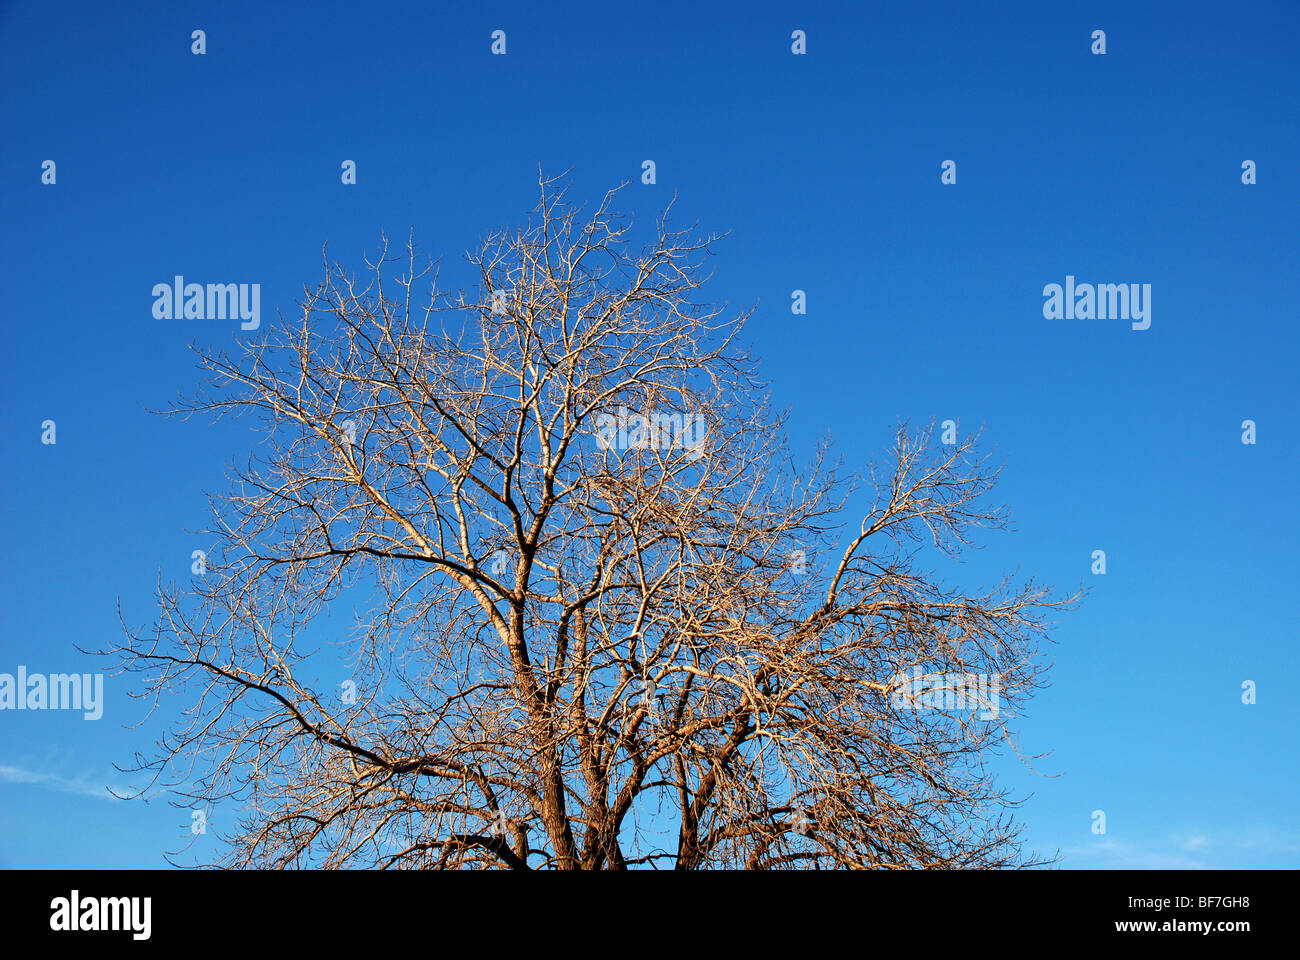 Tree without leafs against blue sky Stock Photo